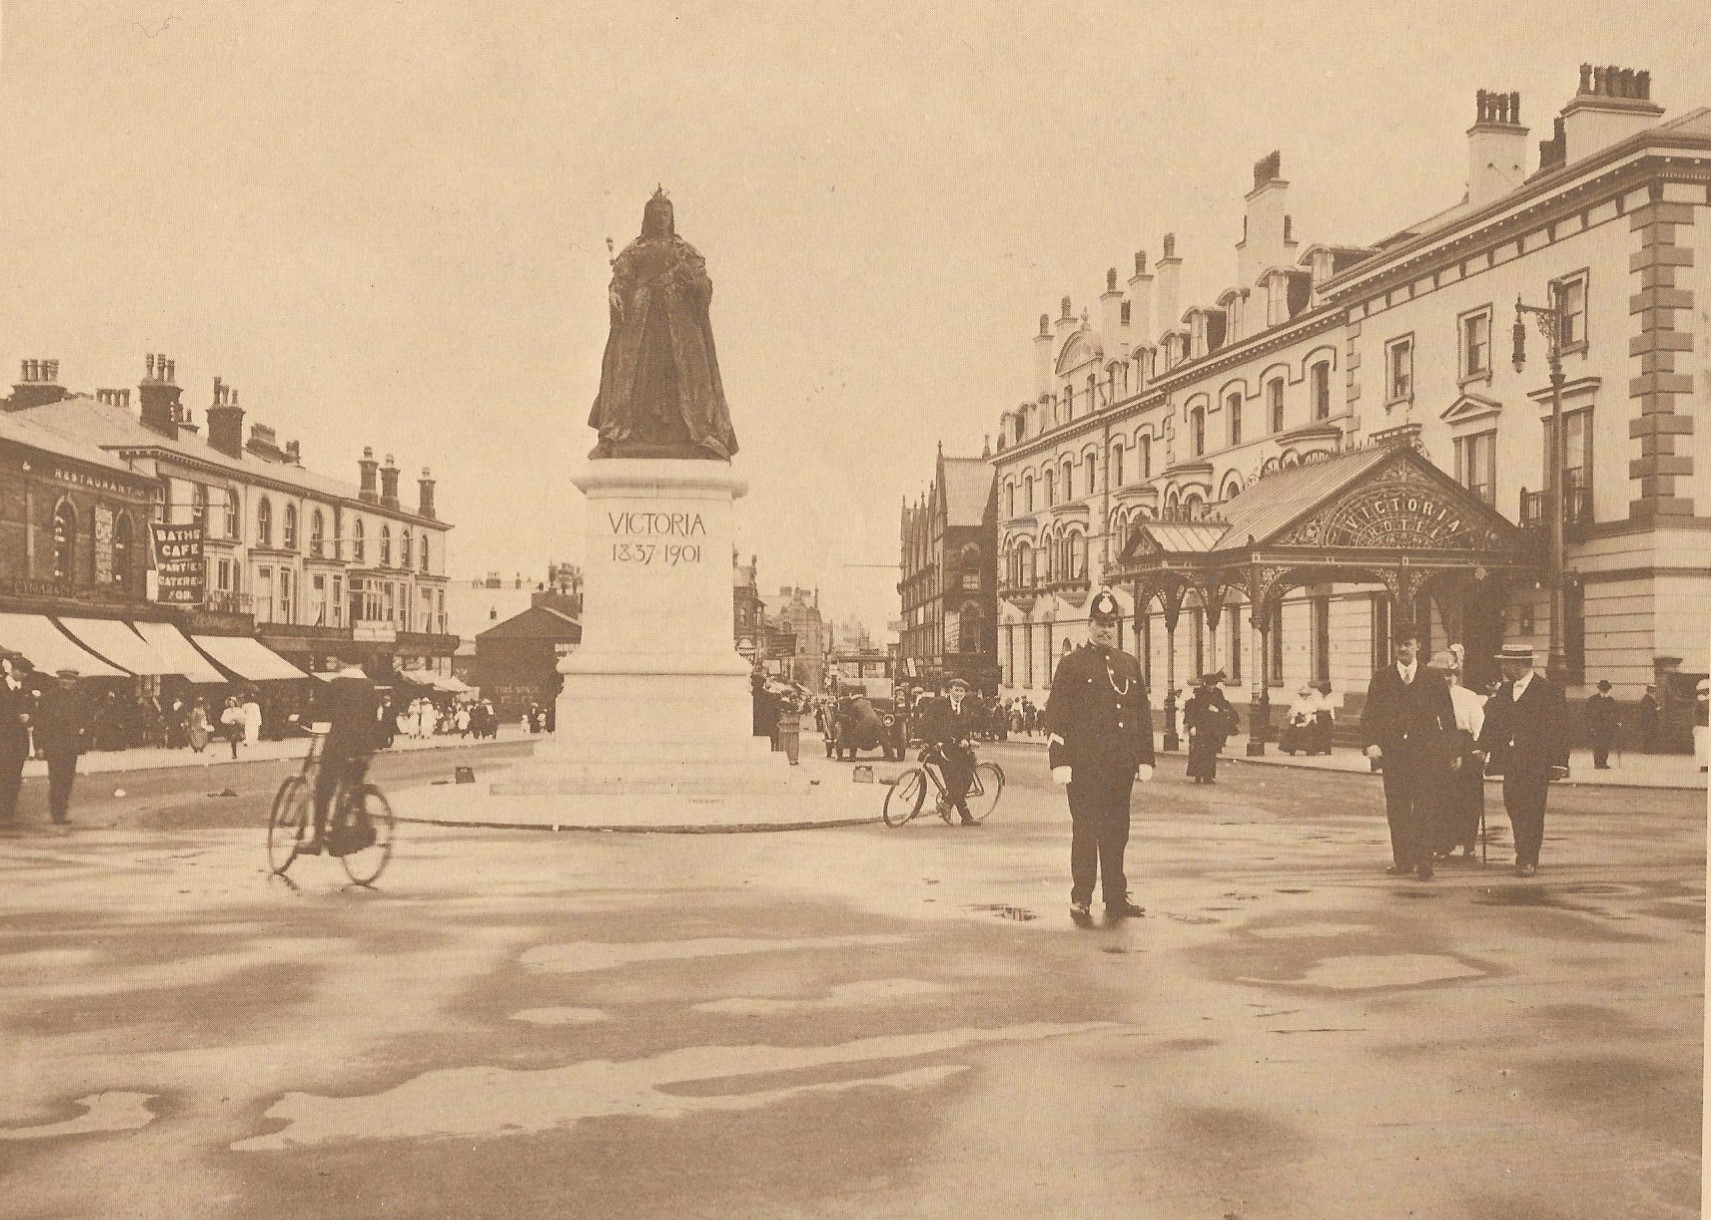 Queen Victoria stands proudly at the top of Nevill Street in Southport, facing the sea. The Victoria Monument and the Victoria Hotel are pictured in 1913. The hotel was replaced by the Maritime Court apartments in the 1970s. The monument was erected in front of Cambridge Hall (now The Atkinson) in 1904 and was moved to Nevill Street in 1912. The Victoria Hotel was built in 1842 and was demolished in 1971. Victoria was the Queen of Great Britain and Ireland between 1837 and her death in 1901. Her reign of 63 years and seven months was longer than any previous British monarch